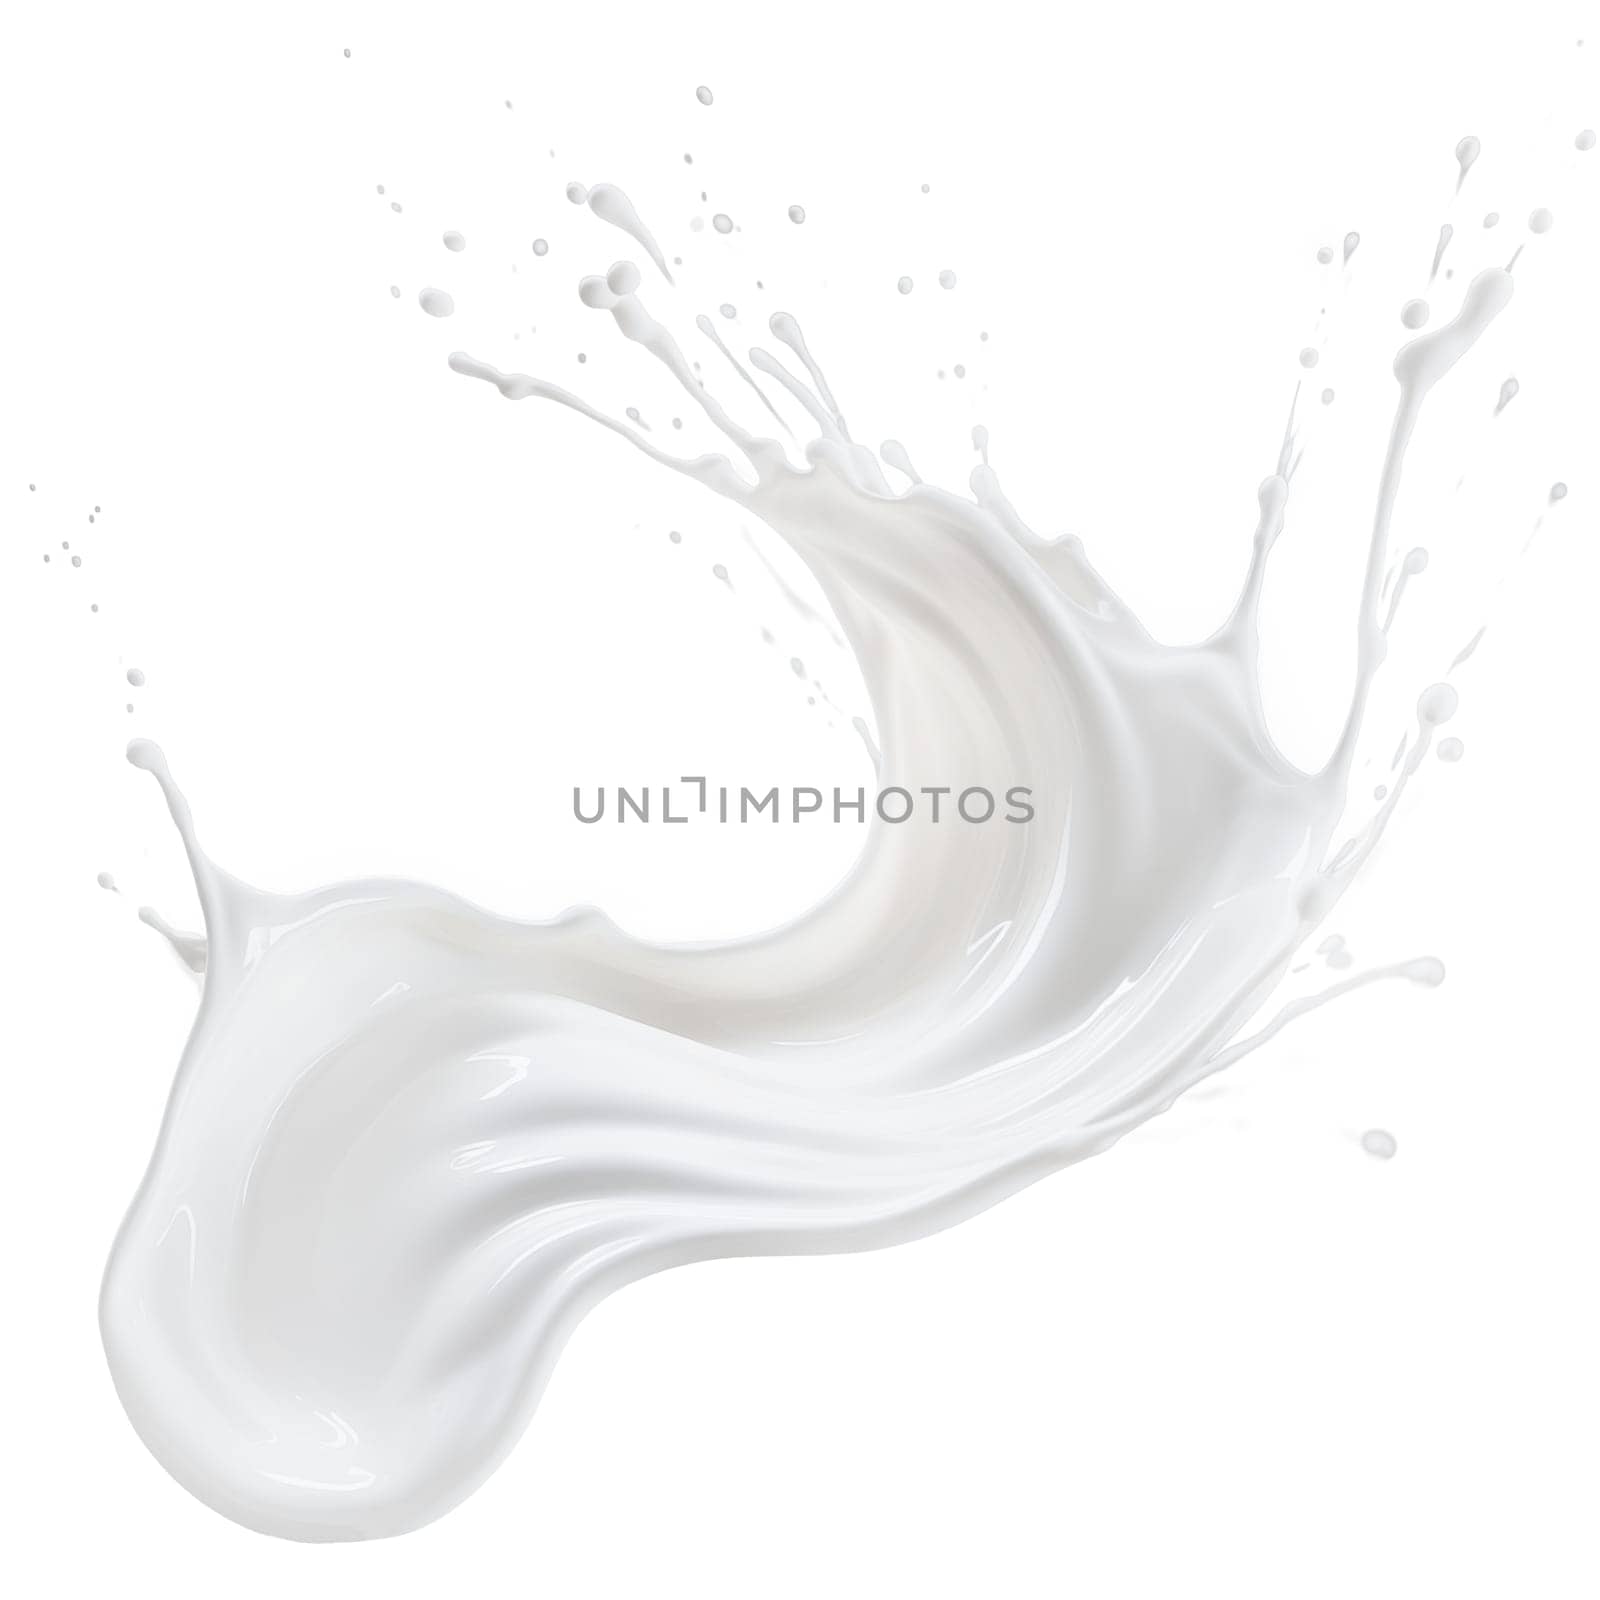 Milk splashes isolated on transparent background. Milk splashes and drops flying in different directions isolated on a white background. Splashes of white liquid. by SERSOL